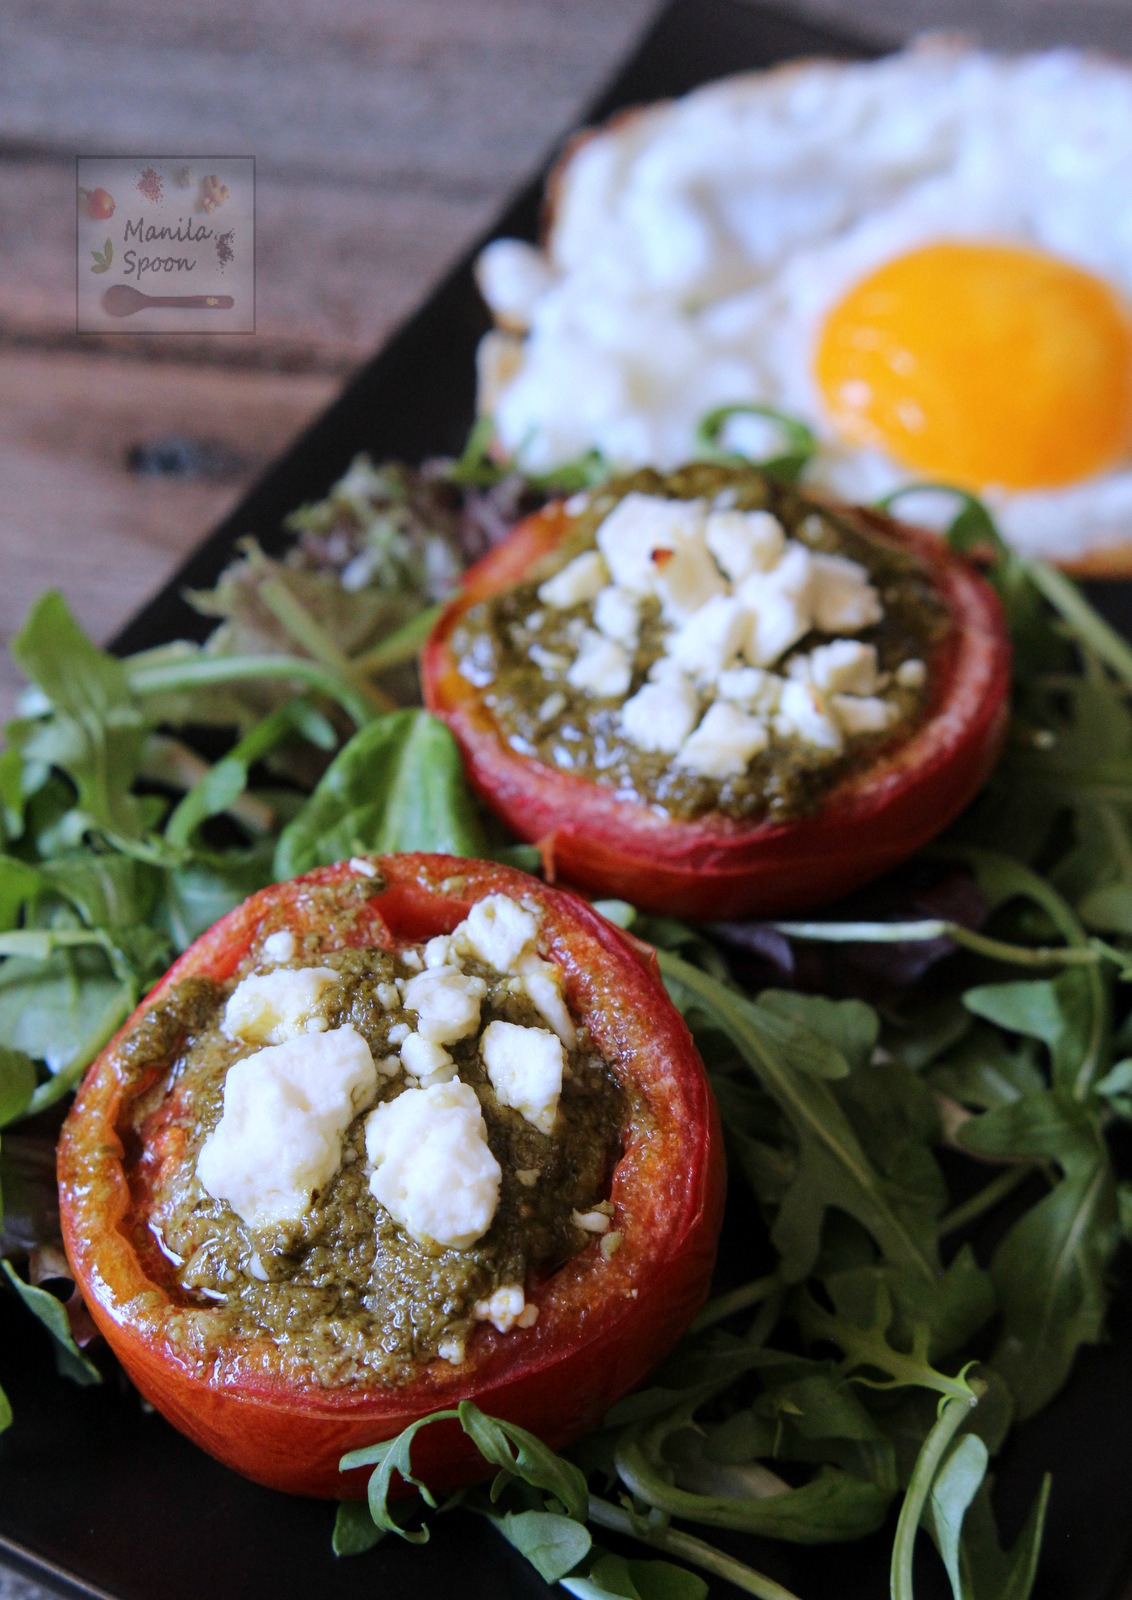 Deliciously good, easy and healthy breakfast or brunch solution - Baked Tomatoes with Pesto and Feta Cheese. Completely gluten-free and low-carb, too! | manilaspoon.com